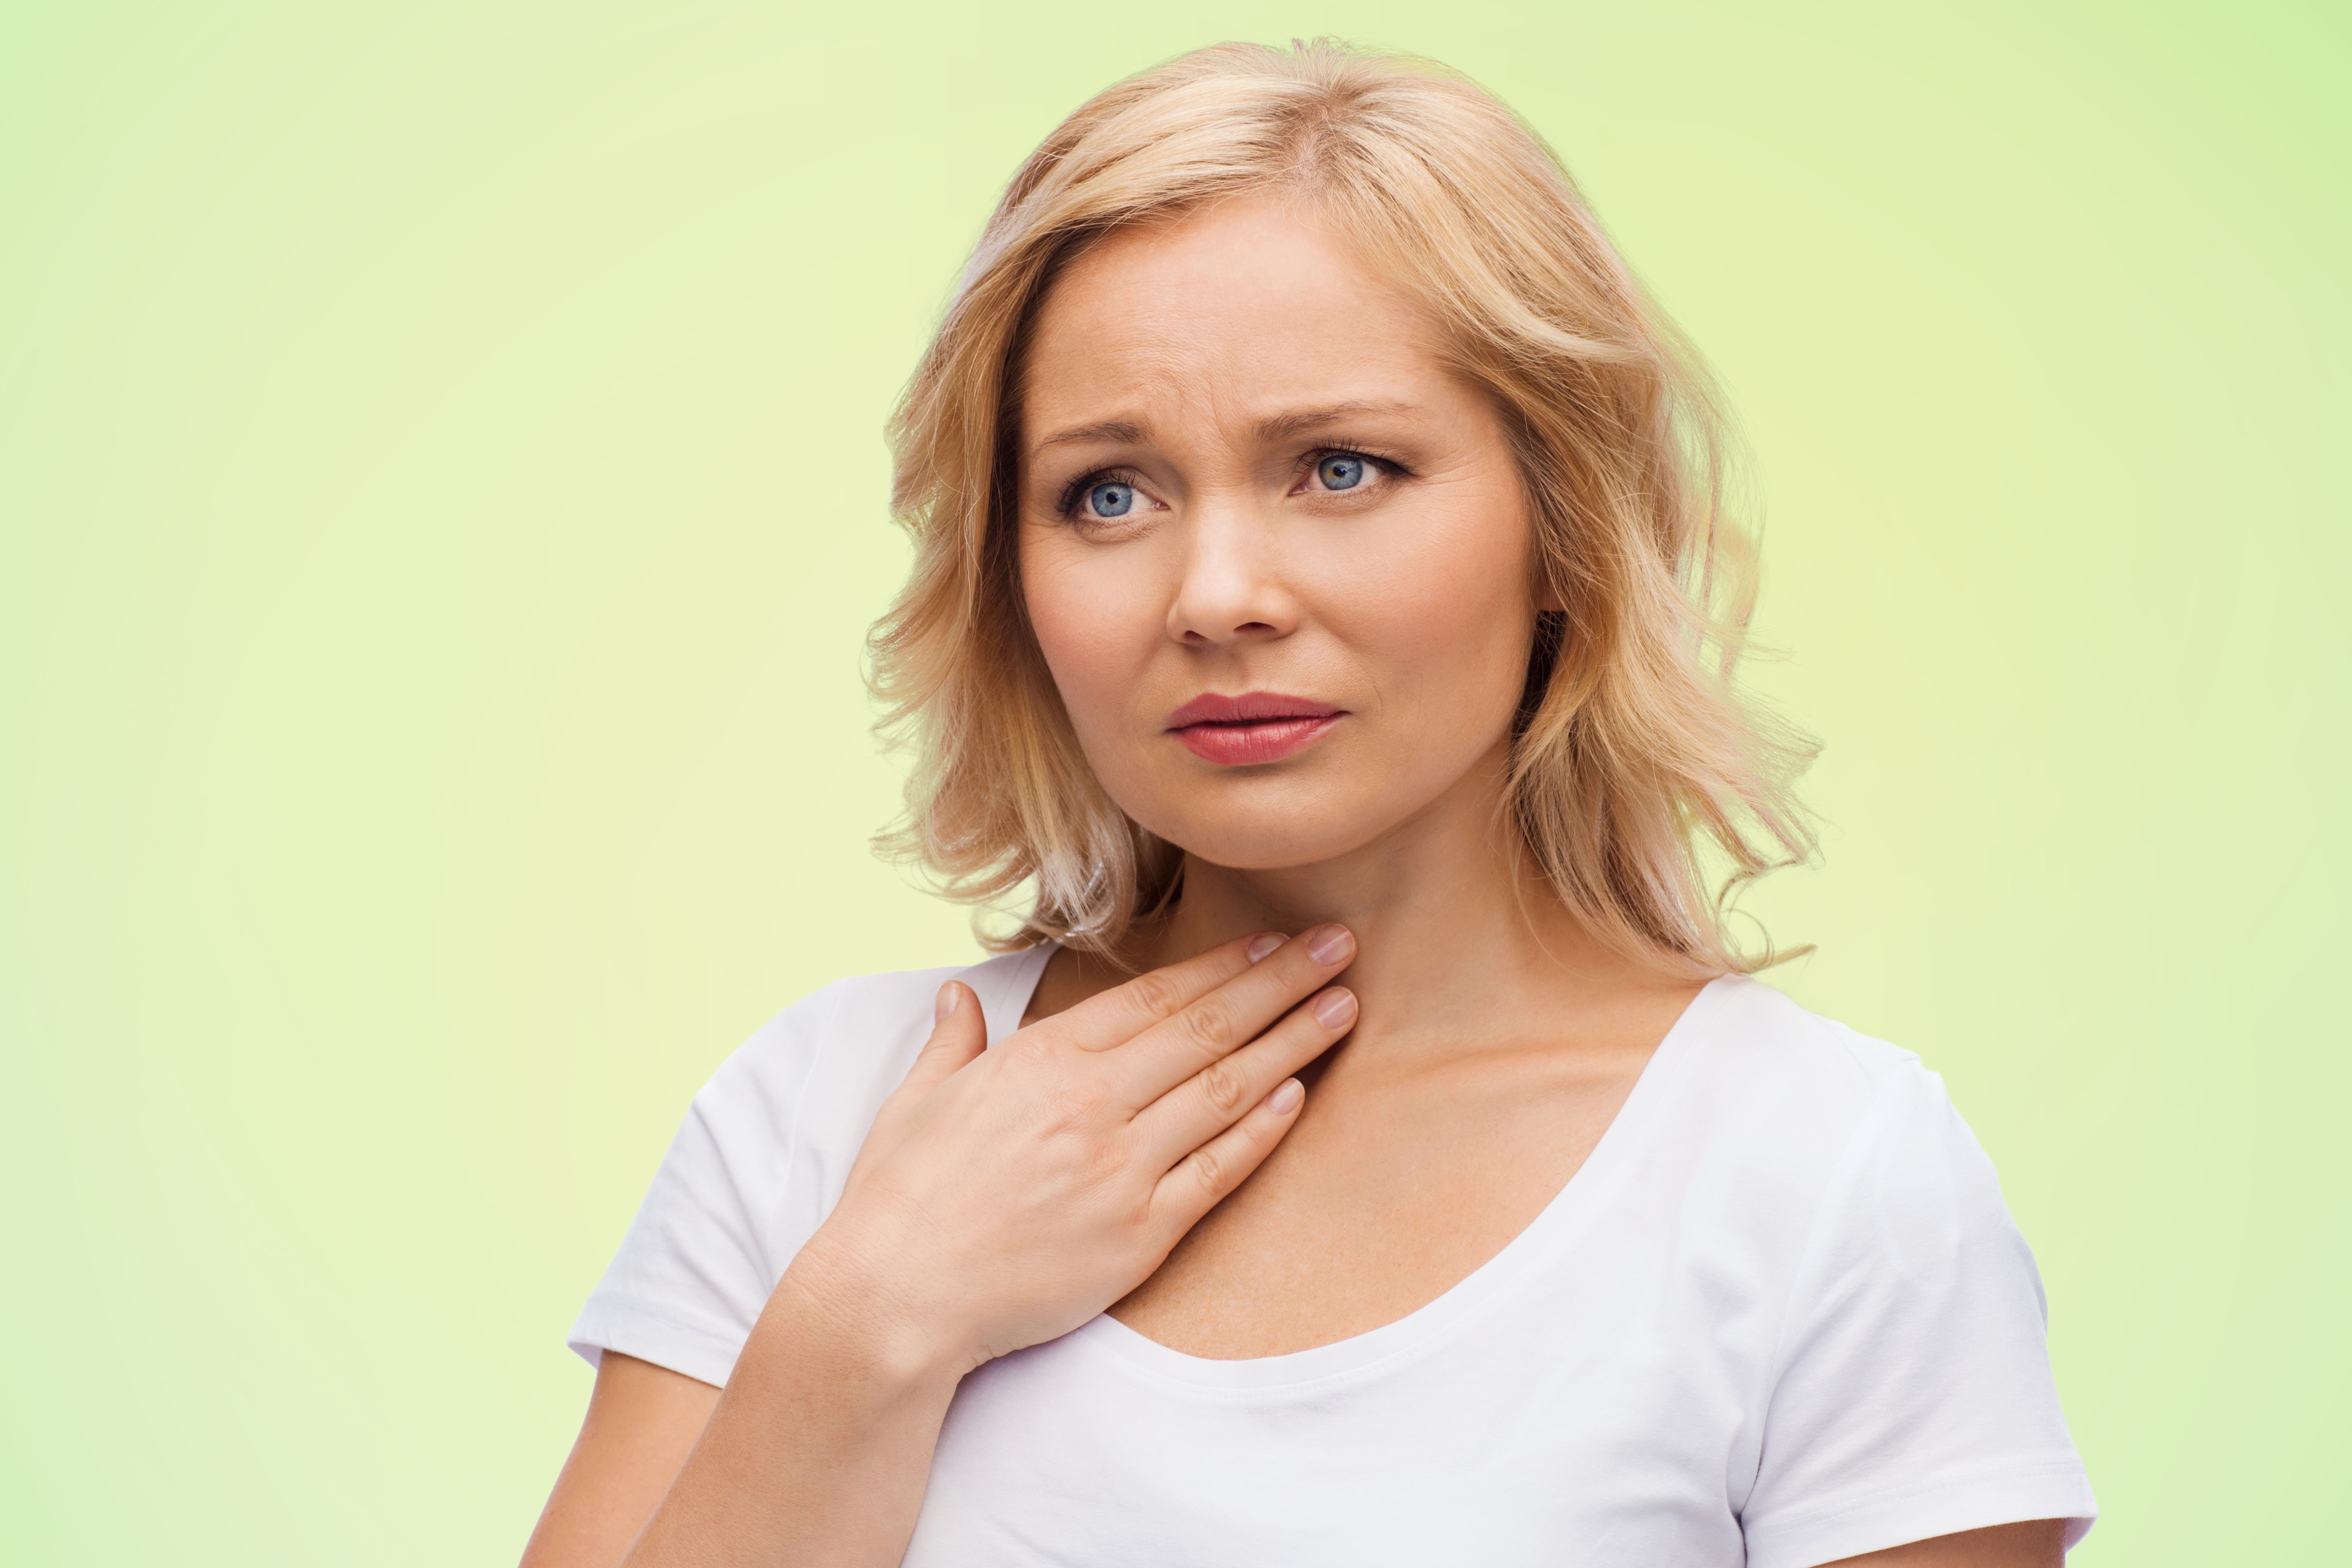 Does Vocal Cord Dysfunction (VCD) Really Exist?